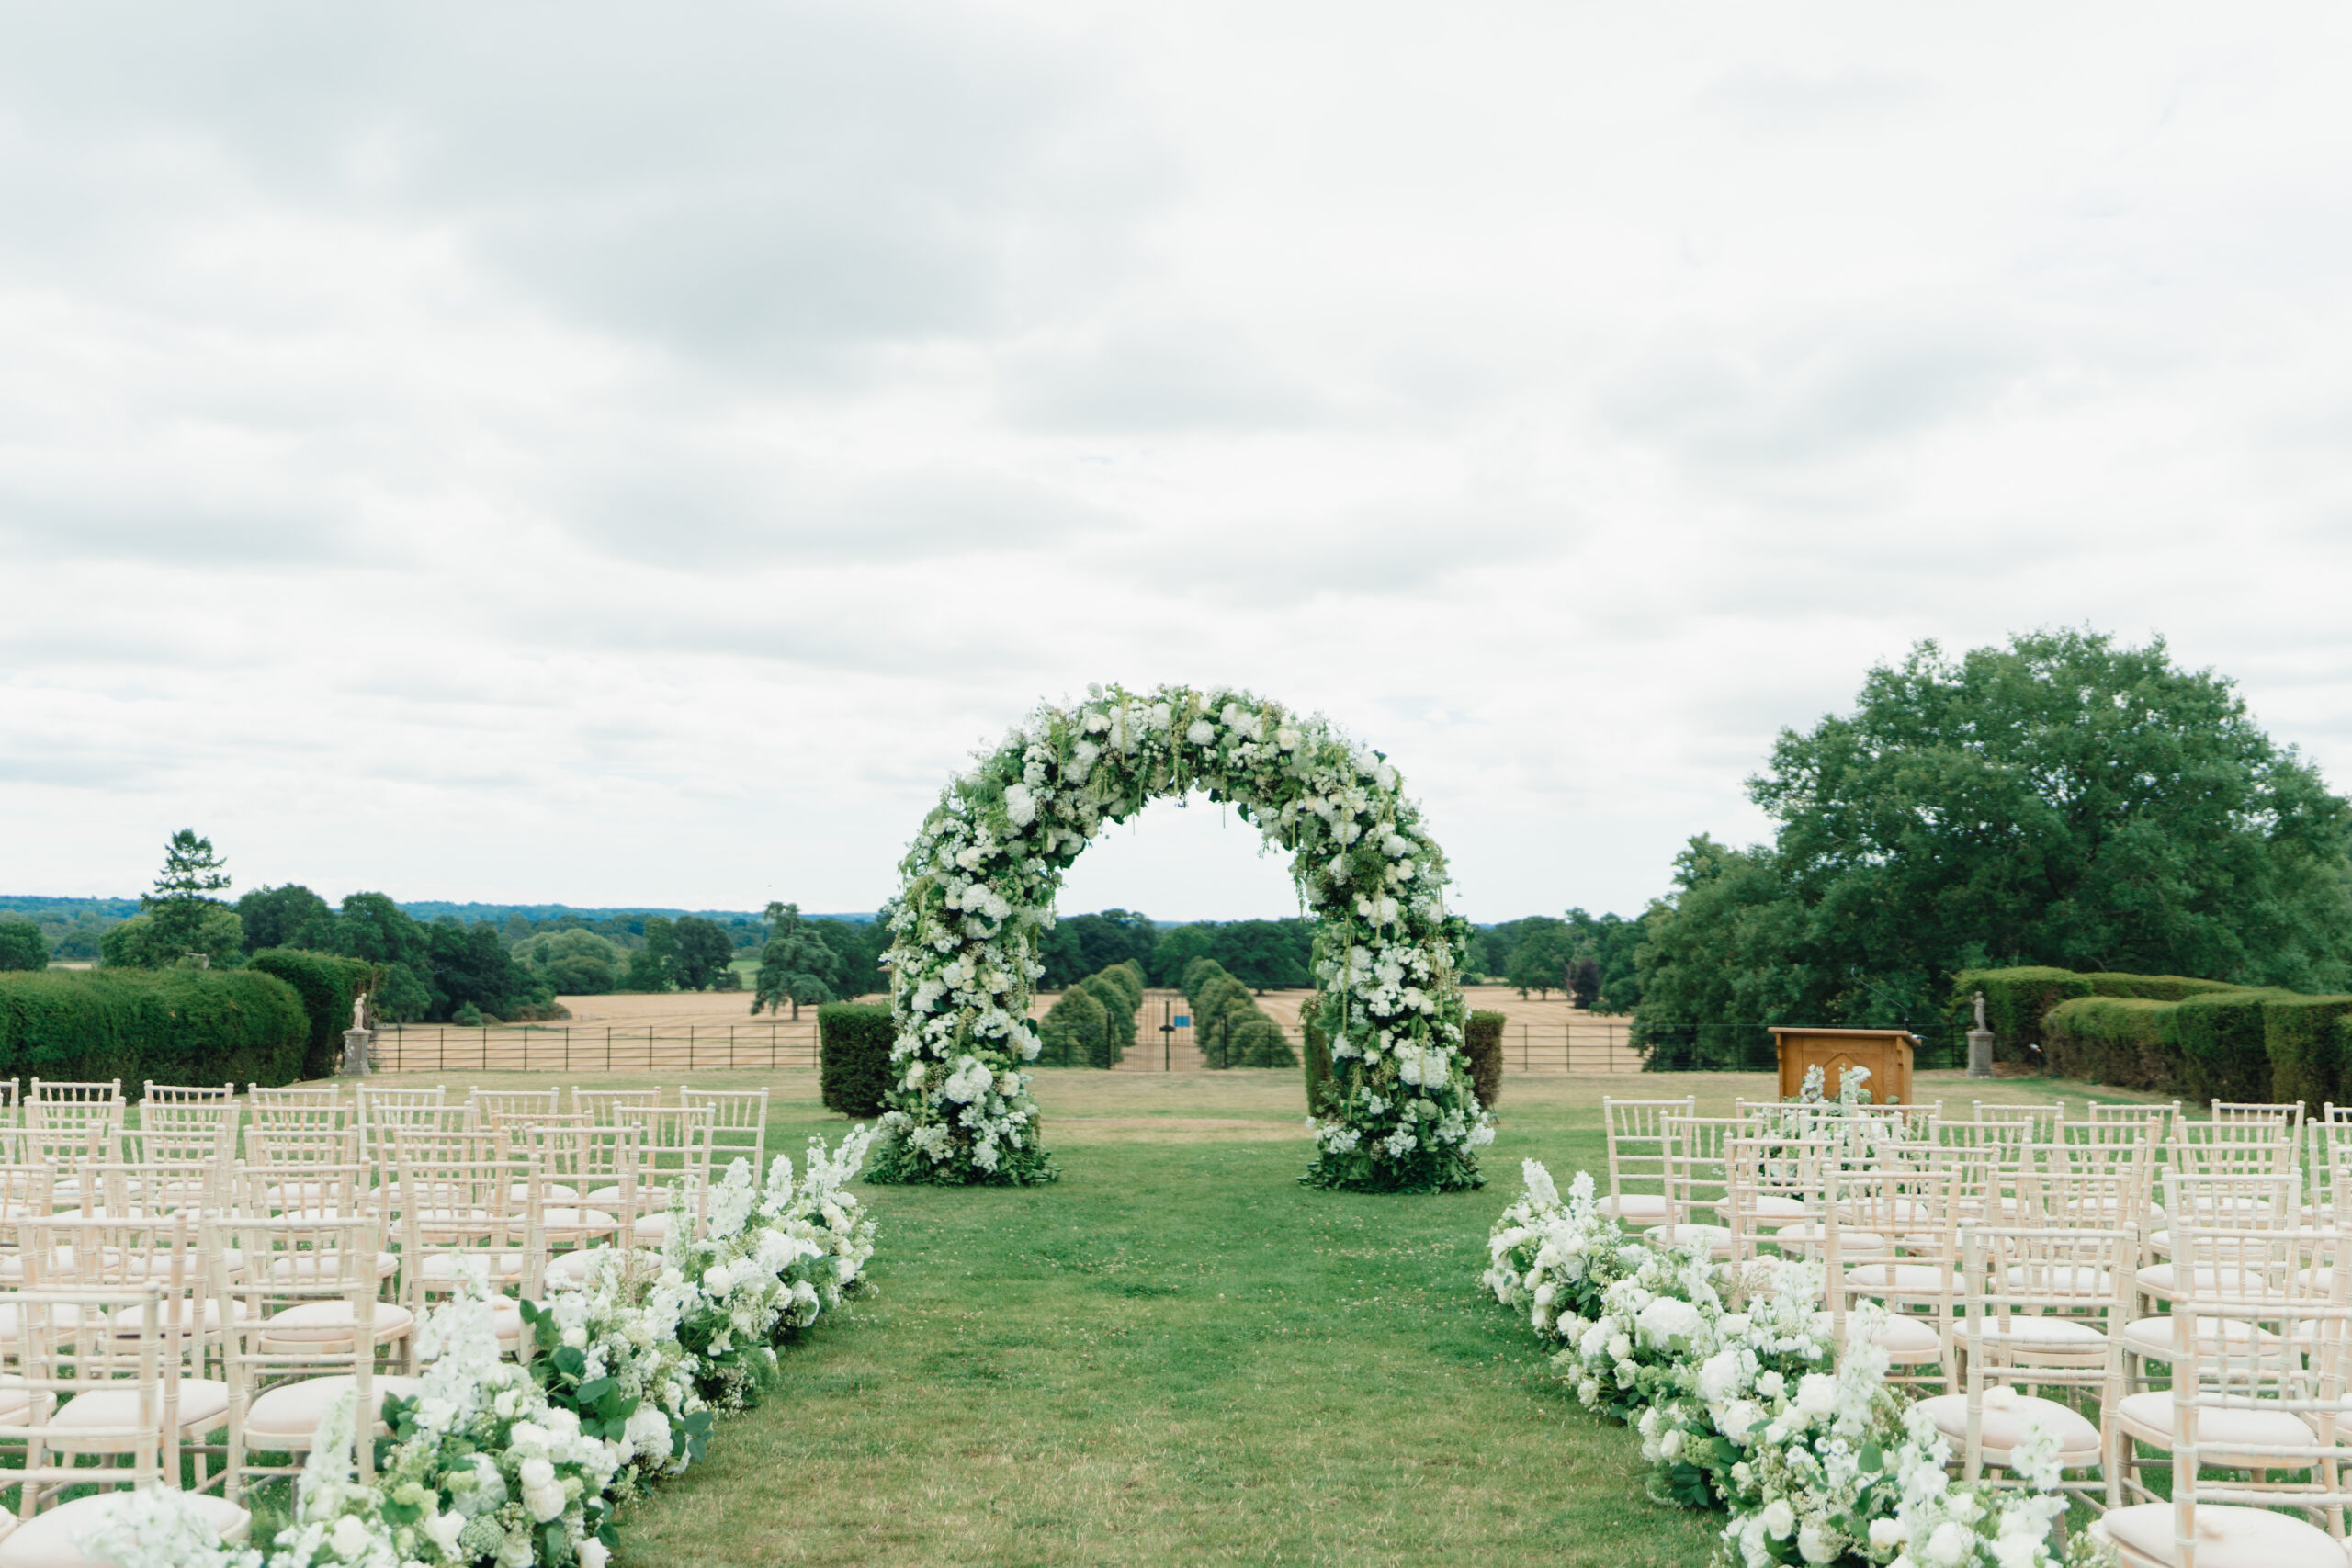 Wedding ceremony set up outside in the English countryside